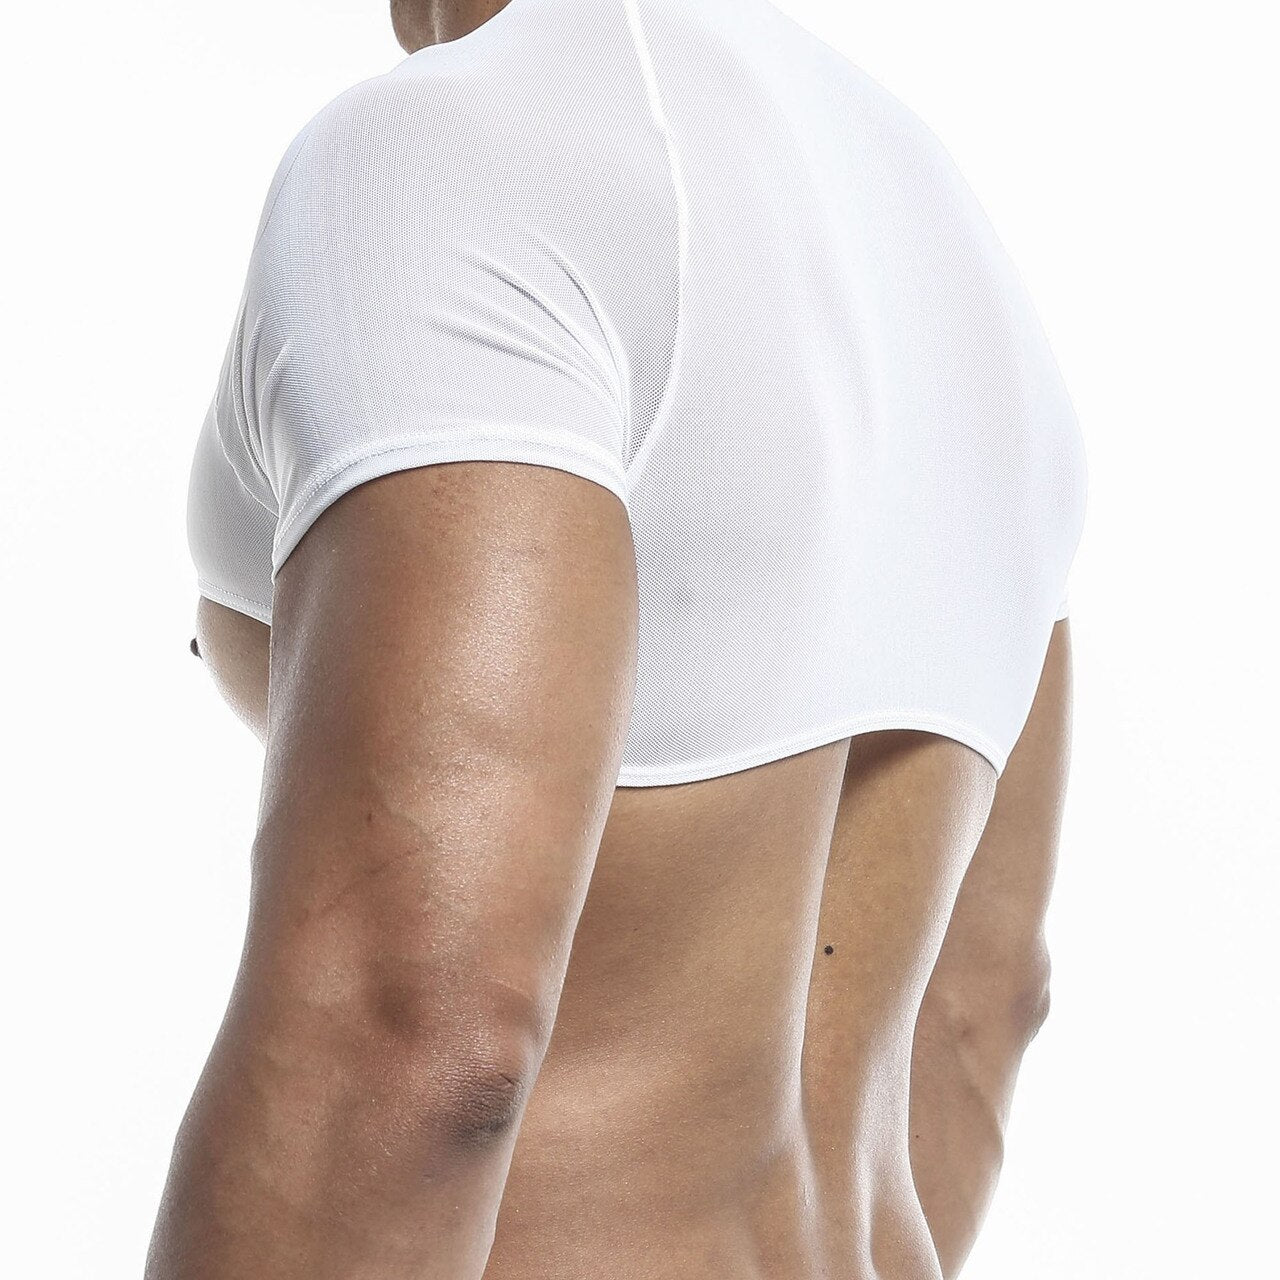 SALE - Mens Joe Snyder Stretch Mesh Posing Top with Cap Sleeves White